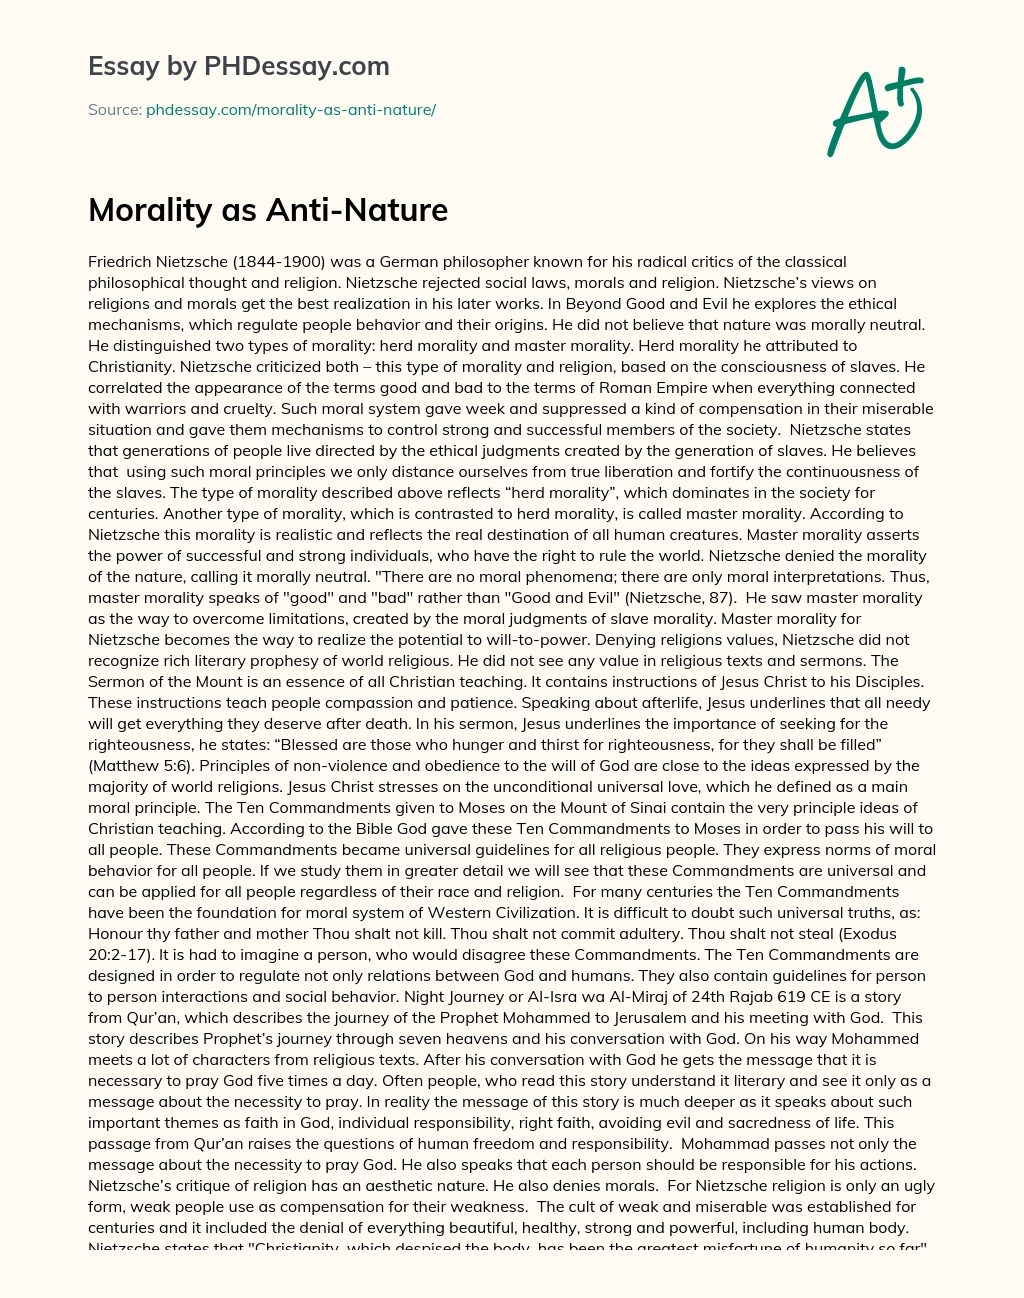 Morality as Anti-Nature essay